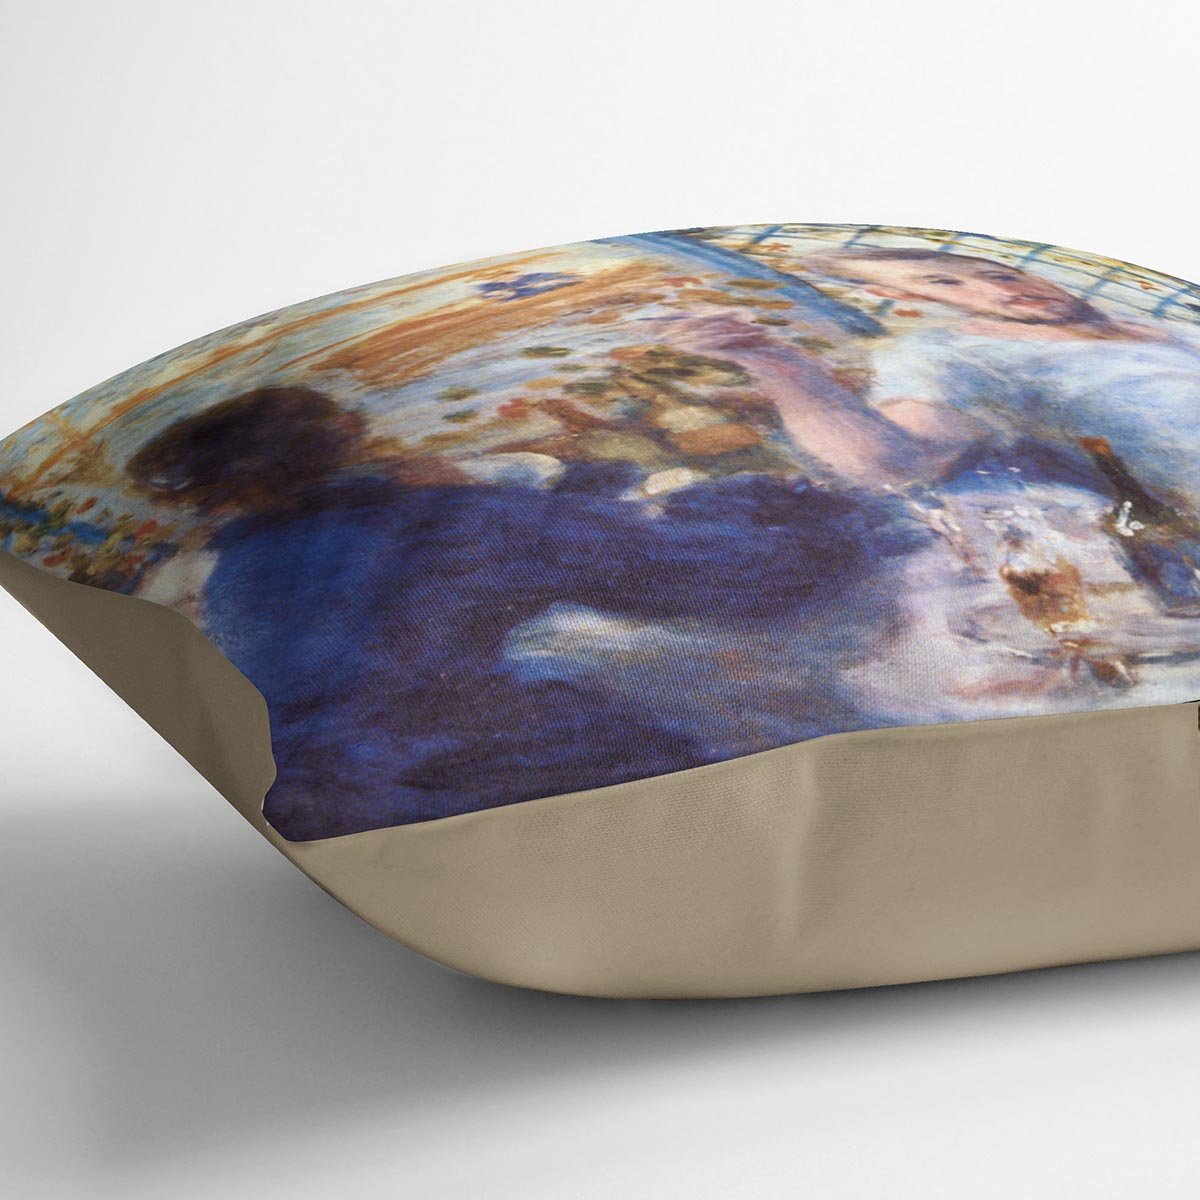 The Rowers Lunch by Renoir Throw Pillow